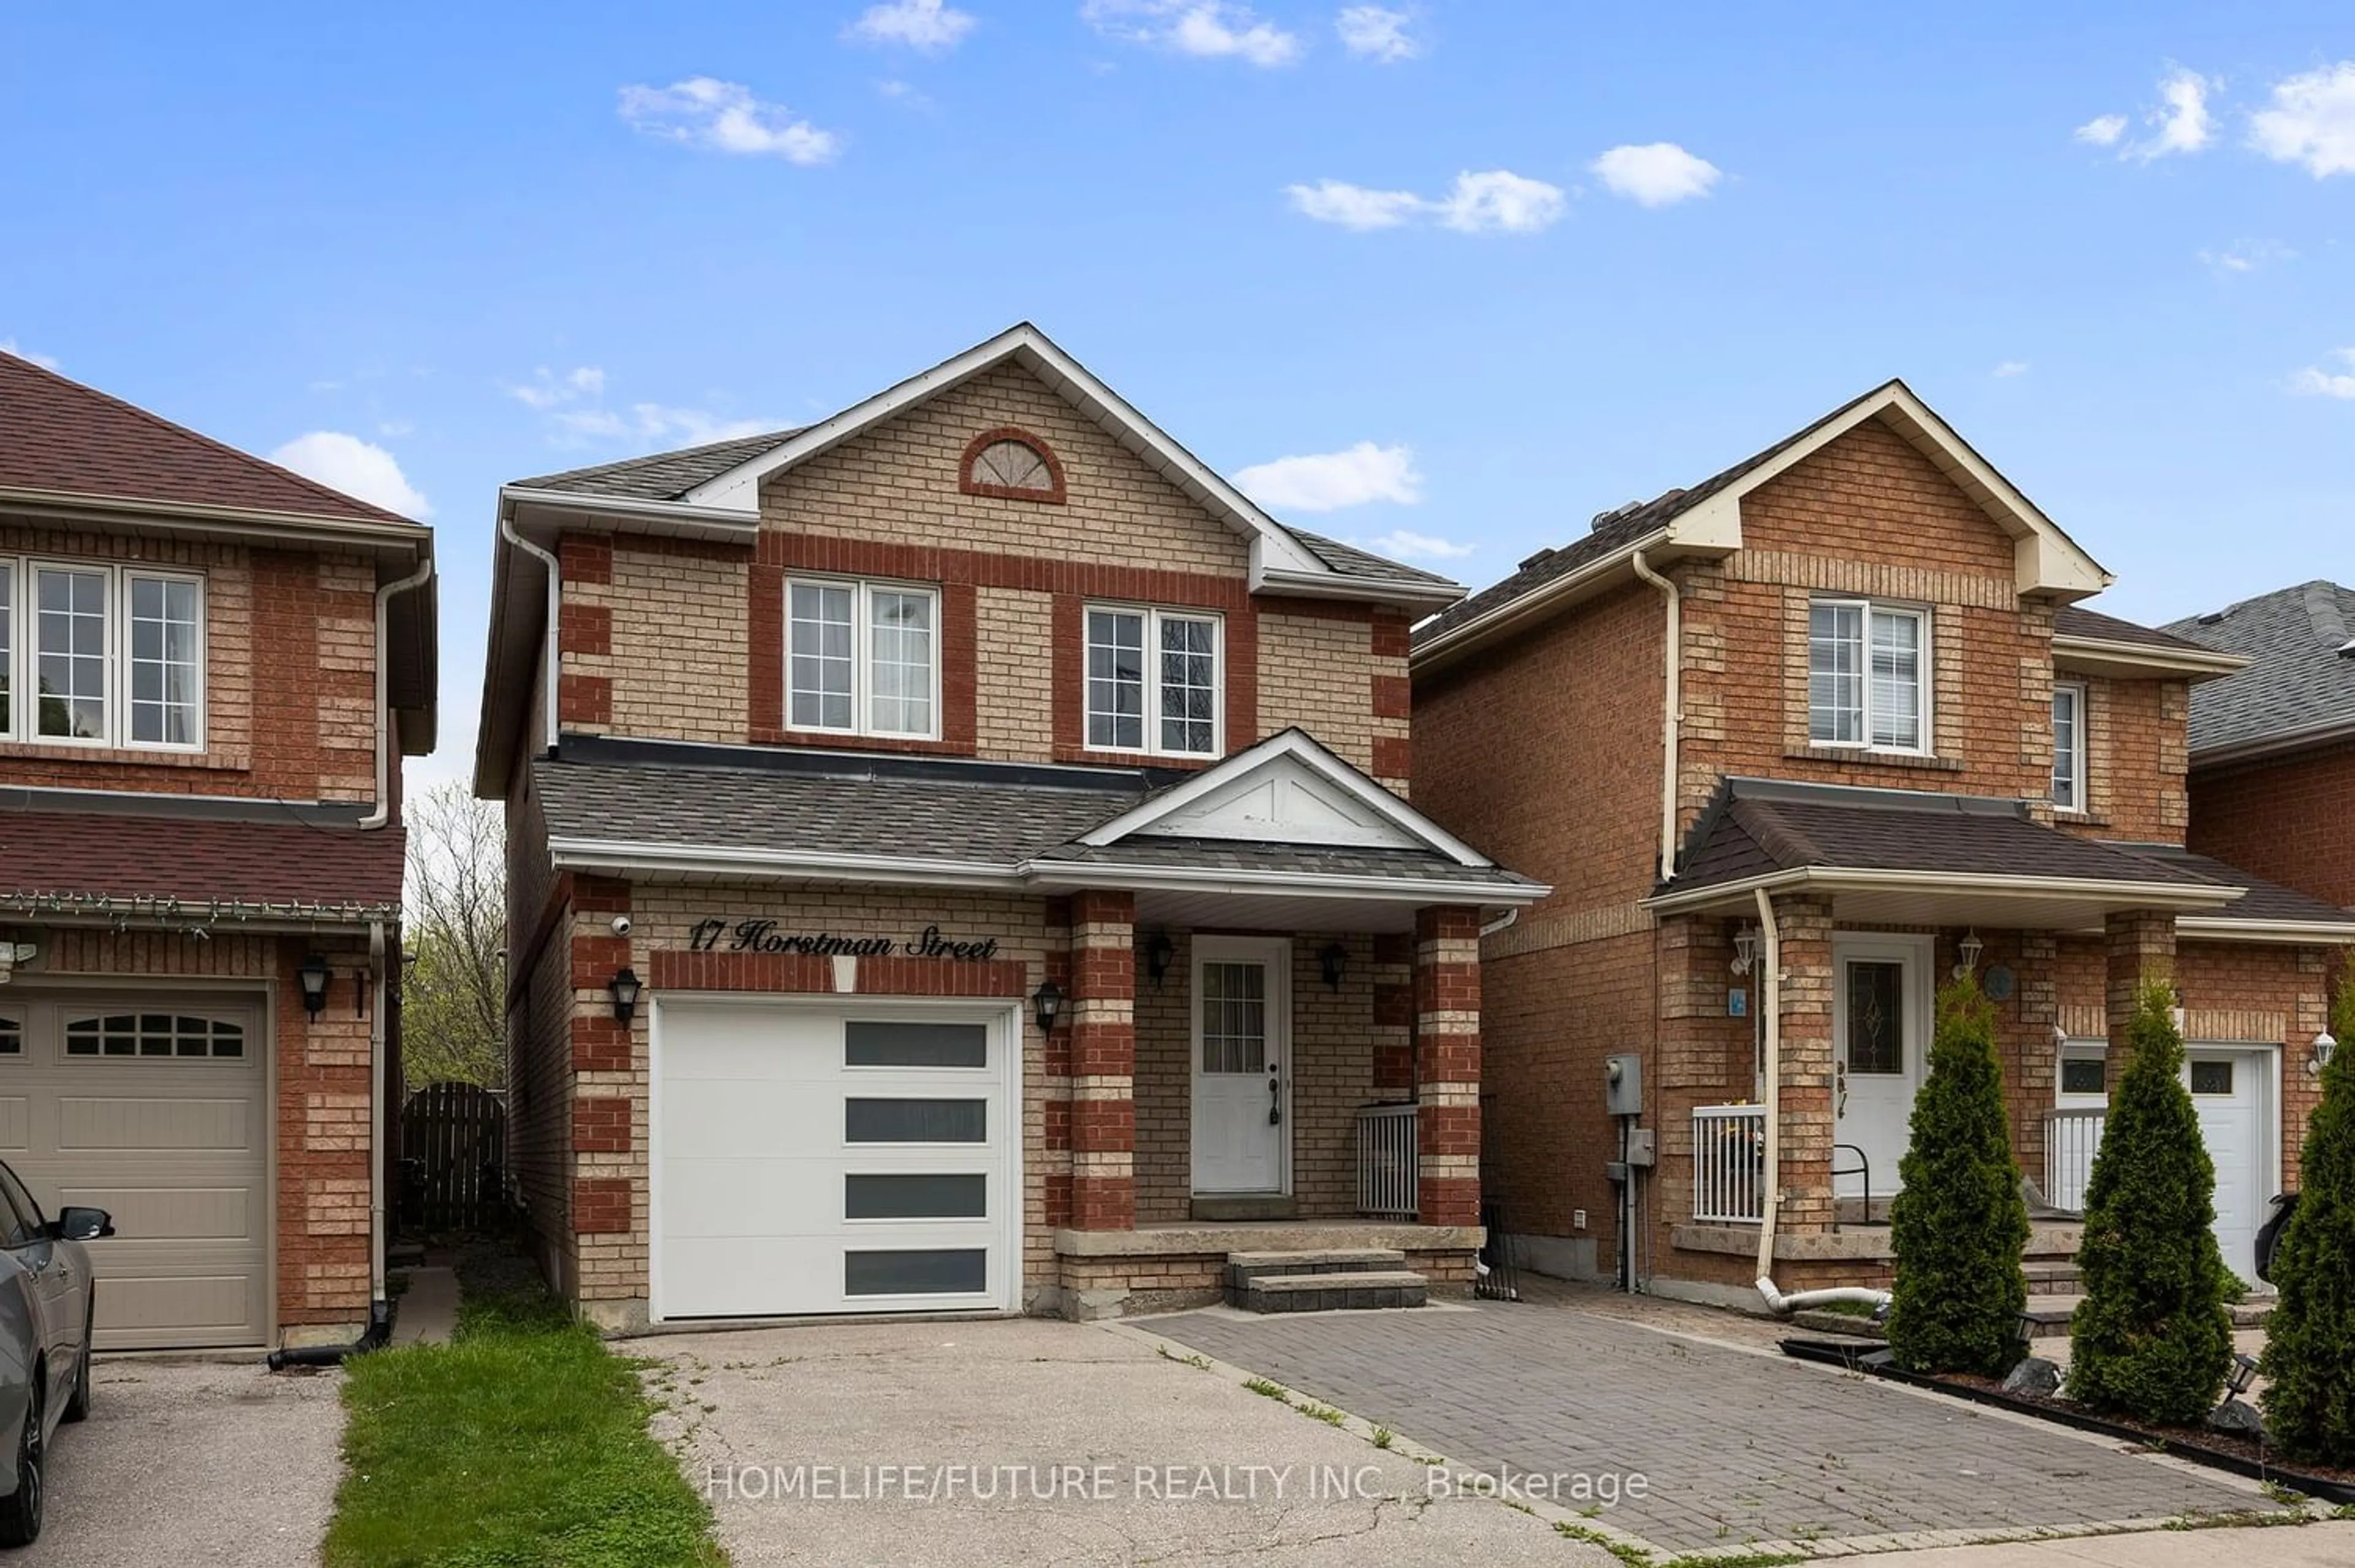 Home with brick exterior material for 17 Horstman St, Markham Ontario L3S 4G7